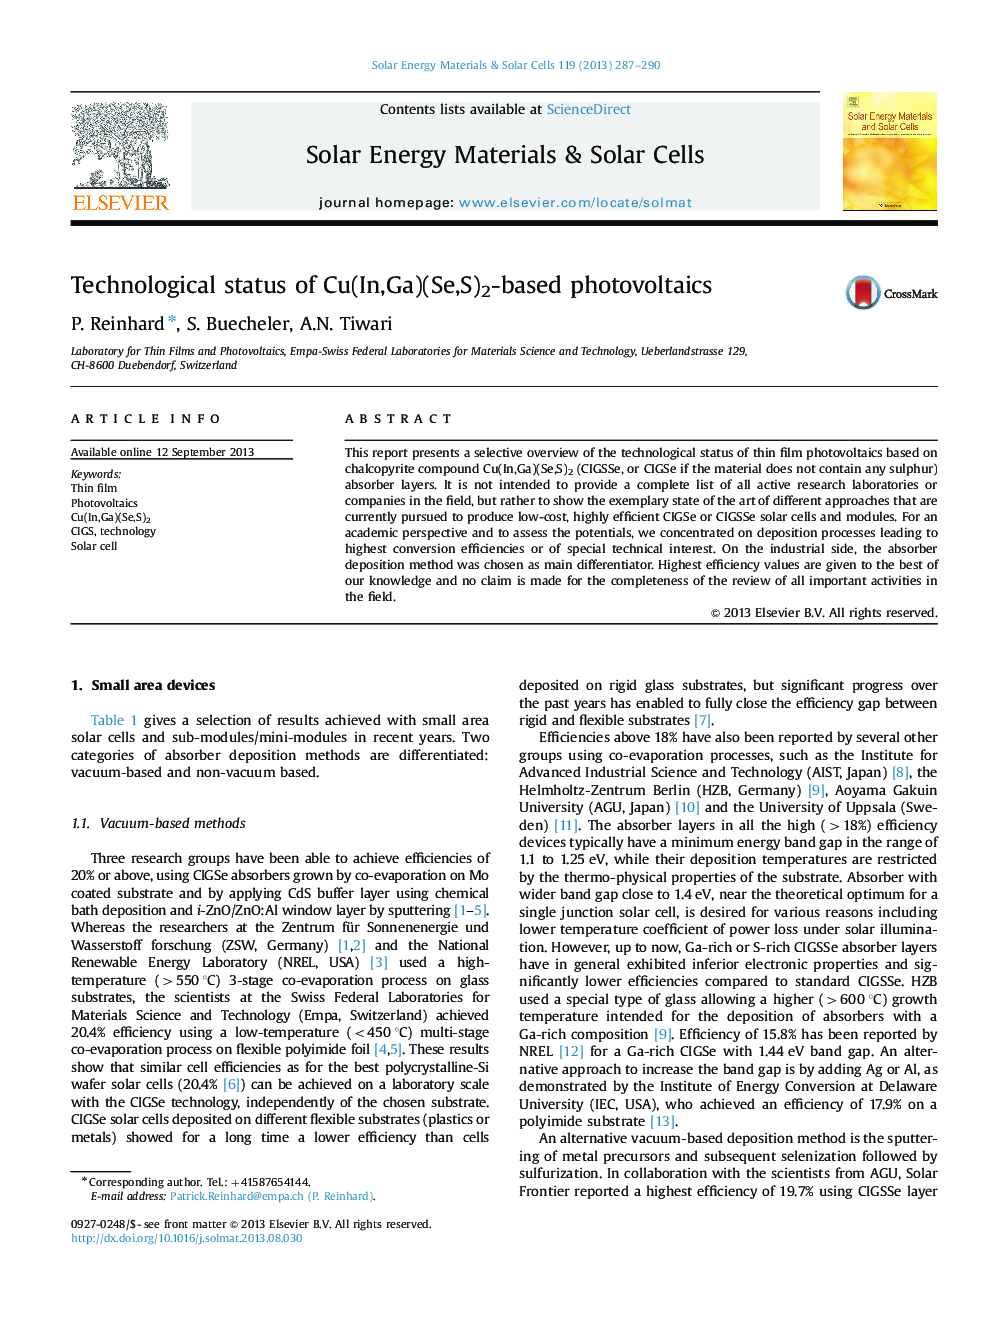 Technological status of Cu(In,Ga)(Se,S)2-based photovoltaics